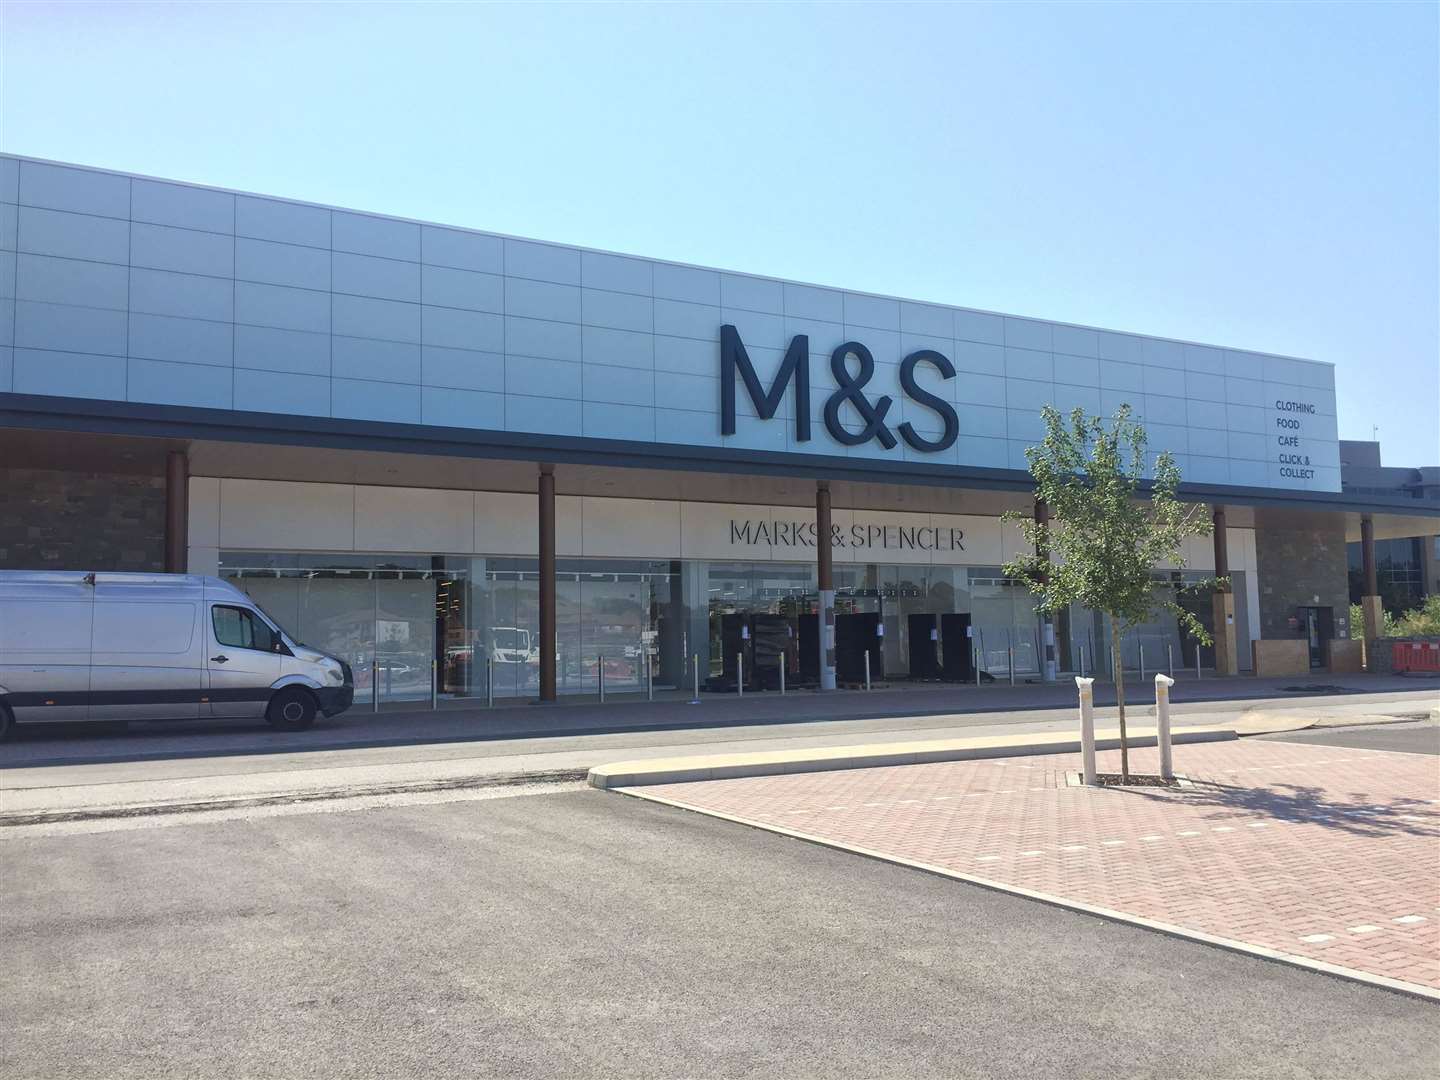 M&S in the Eclipse Retail Park will open next month